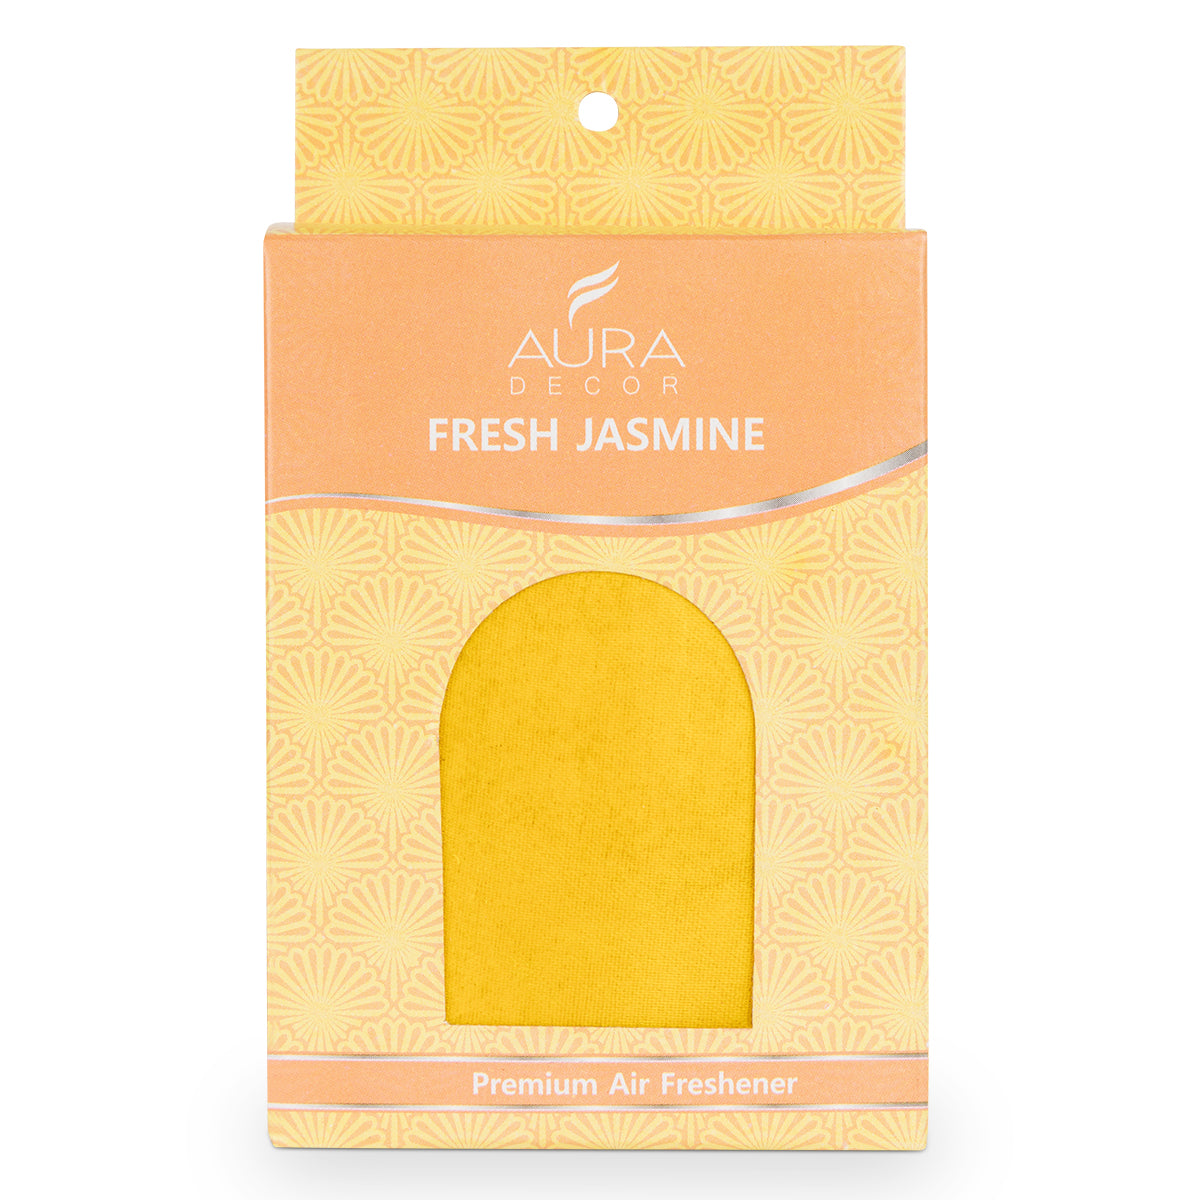 Air Perfume/Air Fresheners Pouch Bag for Office/Room/Car/Toilet and Wardrobe (Pouch Pack 40 gm)